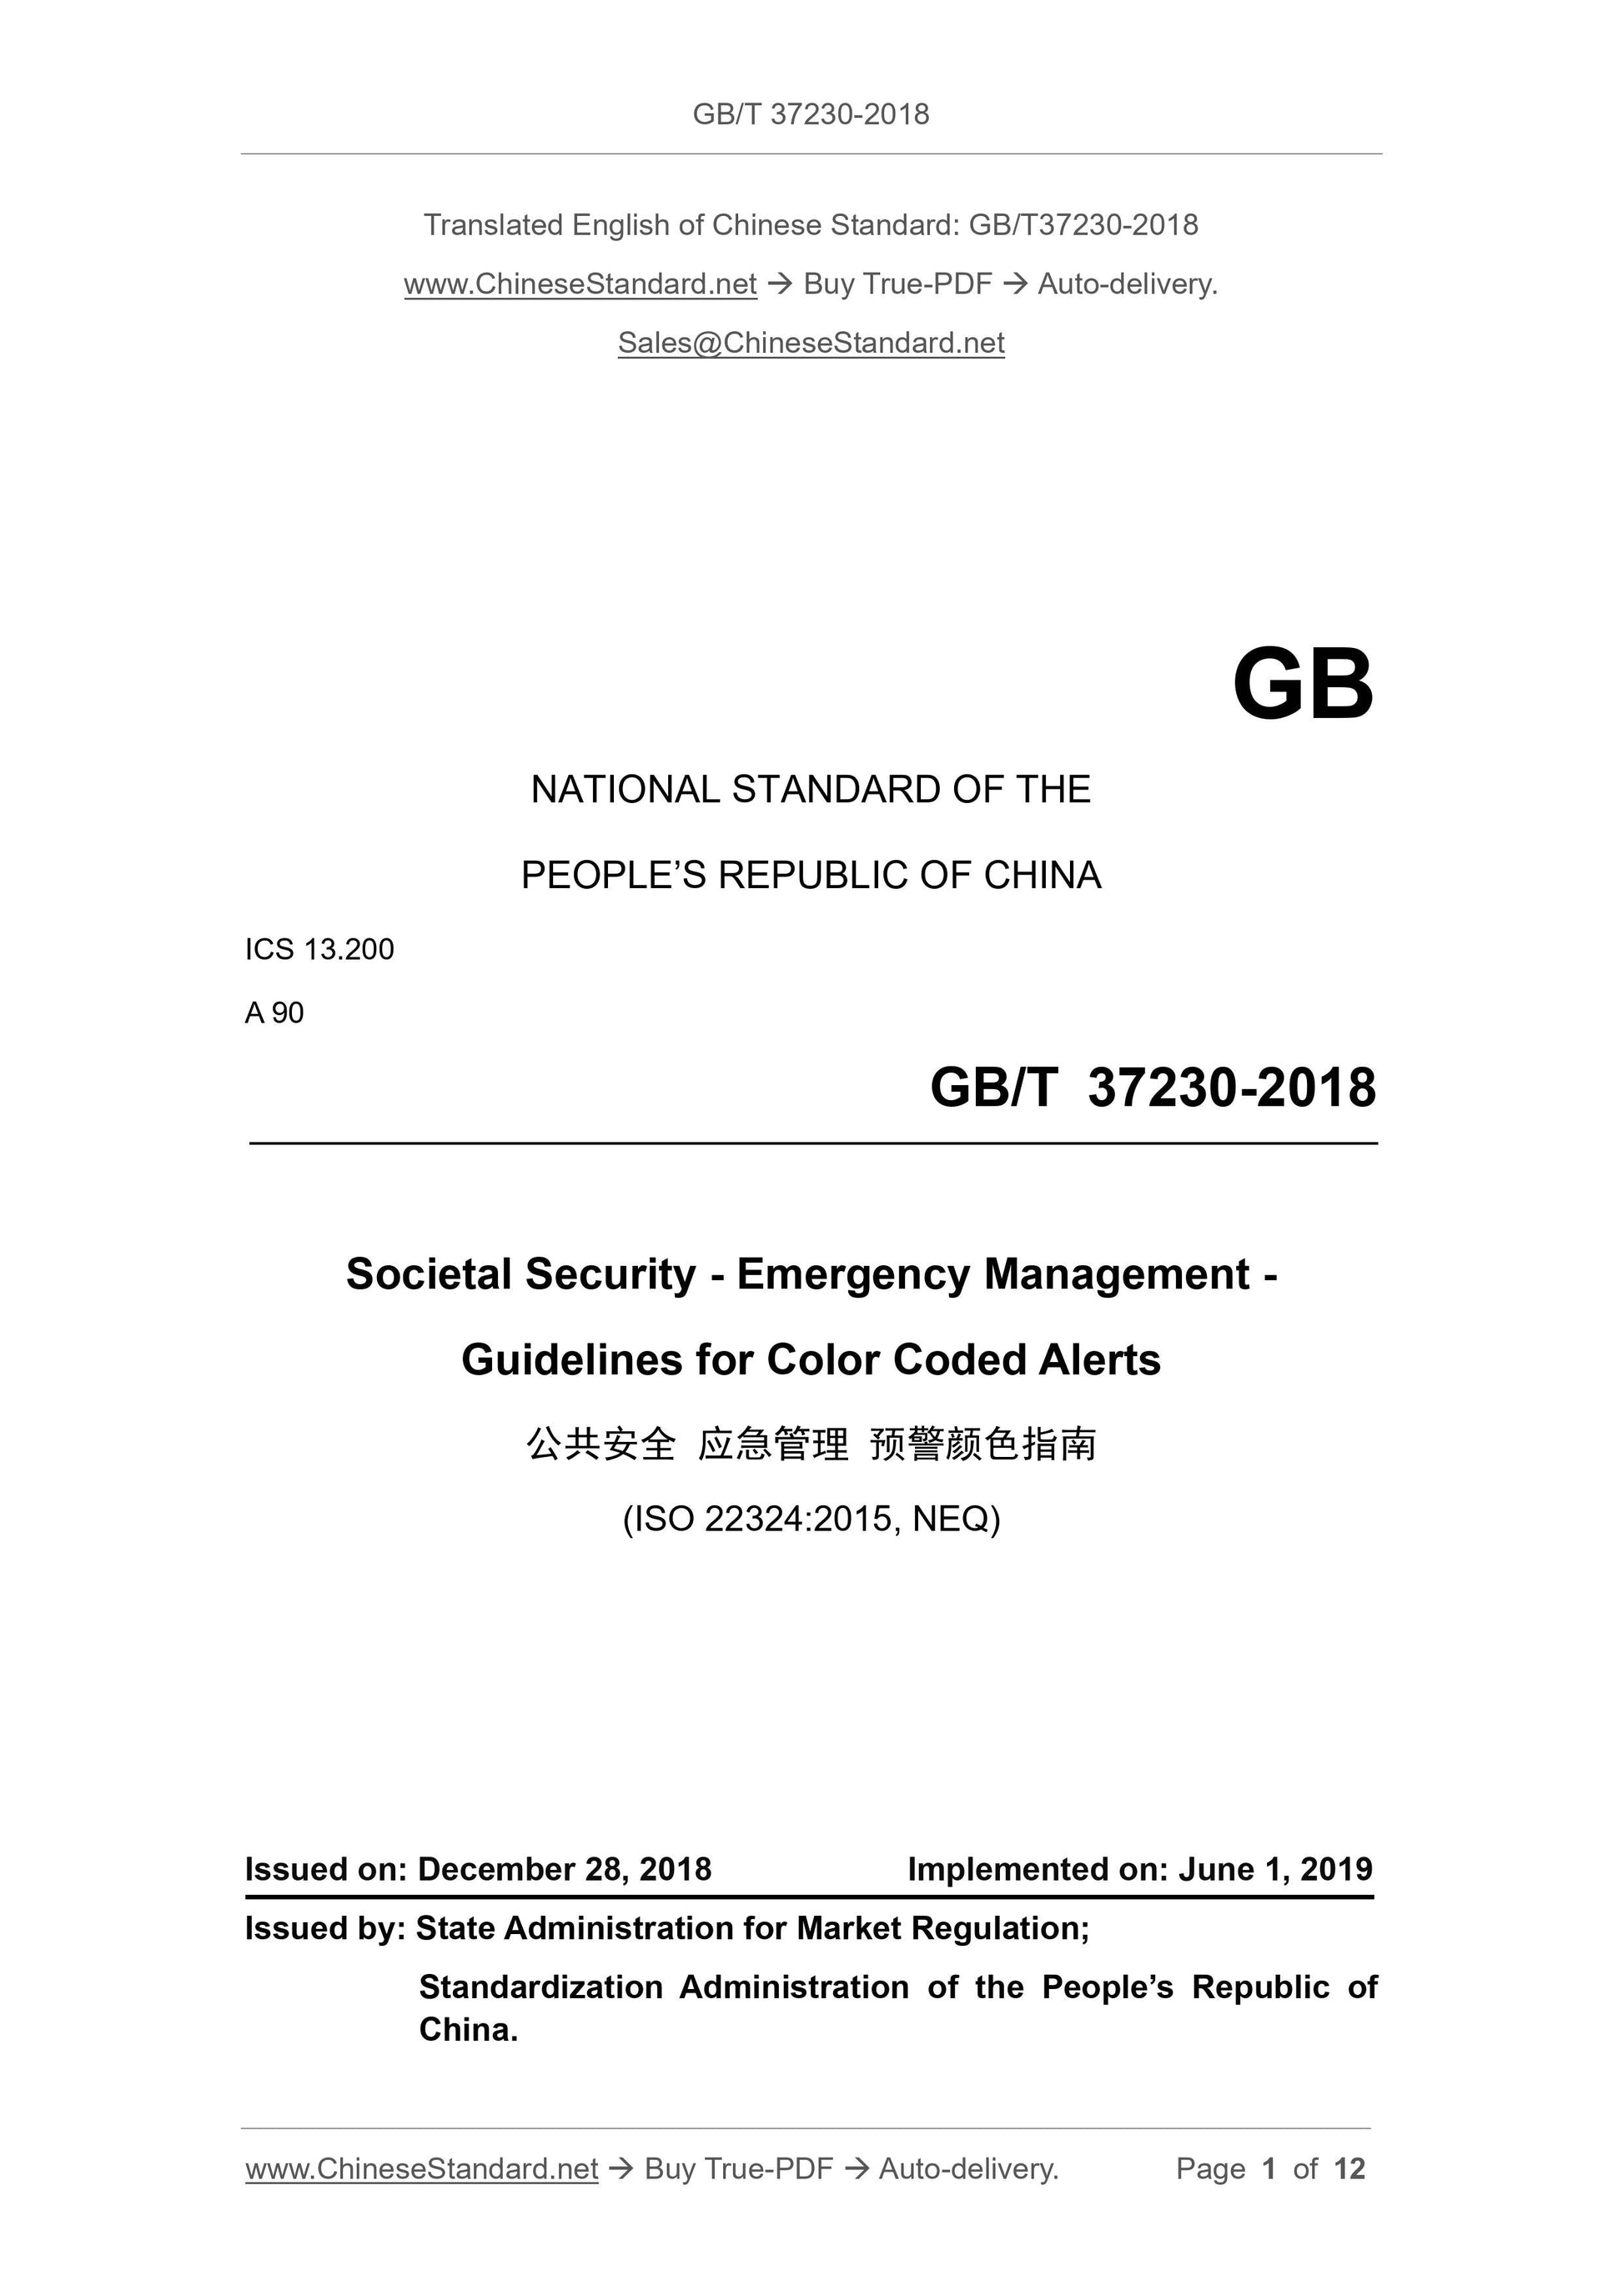 GB/T 37230-2018 Page 1